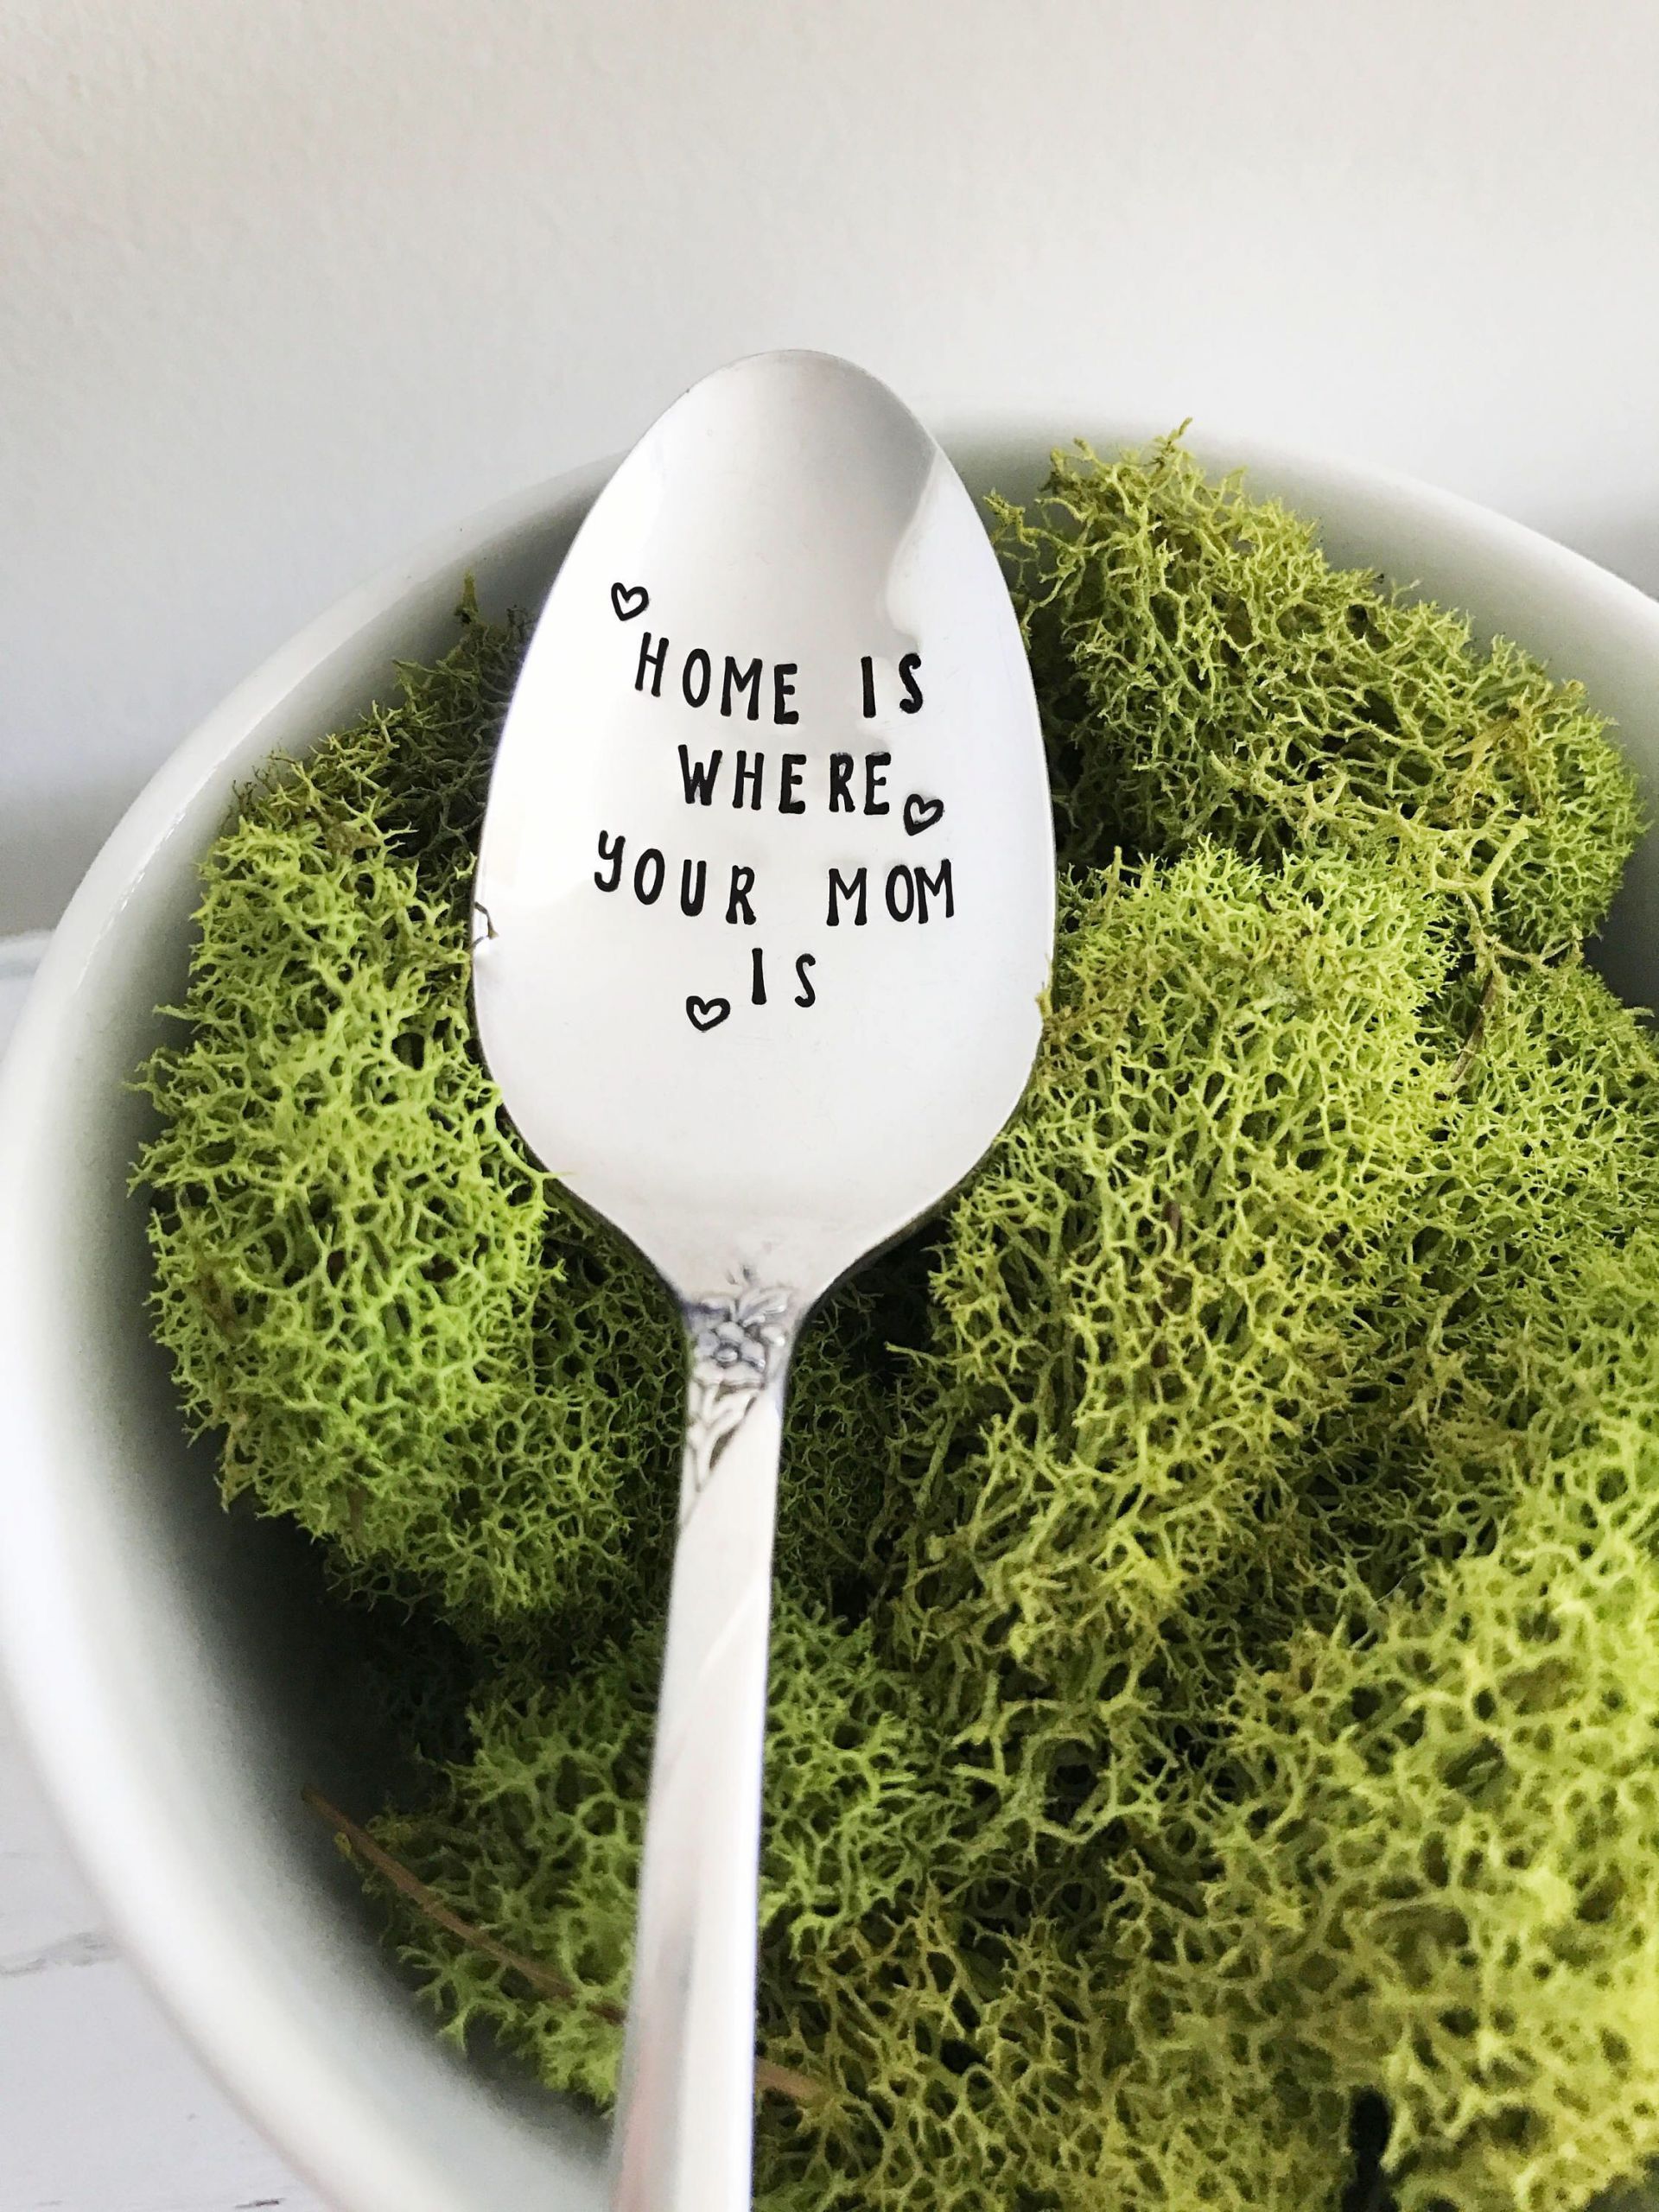 Gift Ideas For Boyfriends Mom Birthday
 Home Is Where Your Mom Is Spoon Stamped Spoon Custom